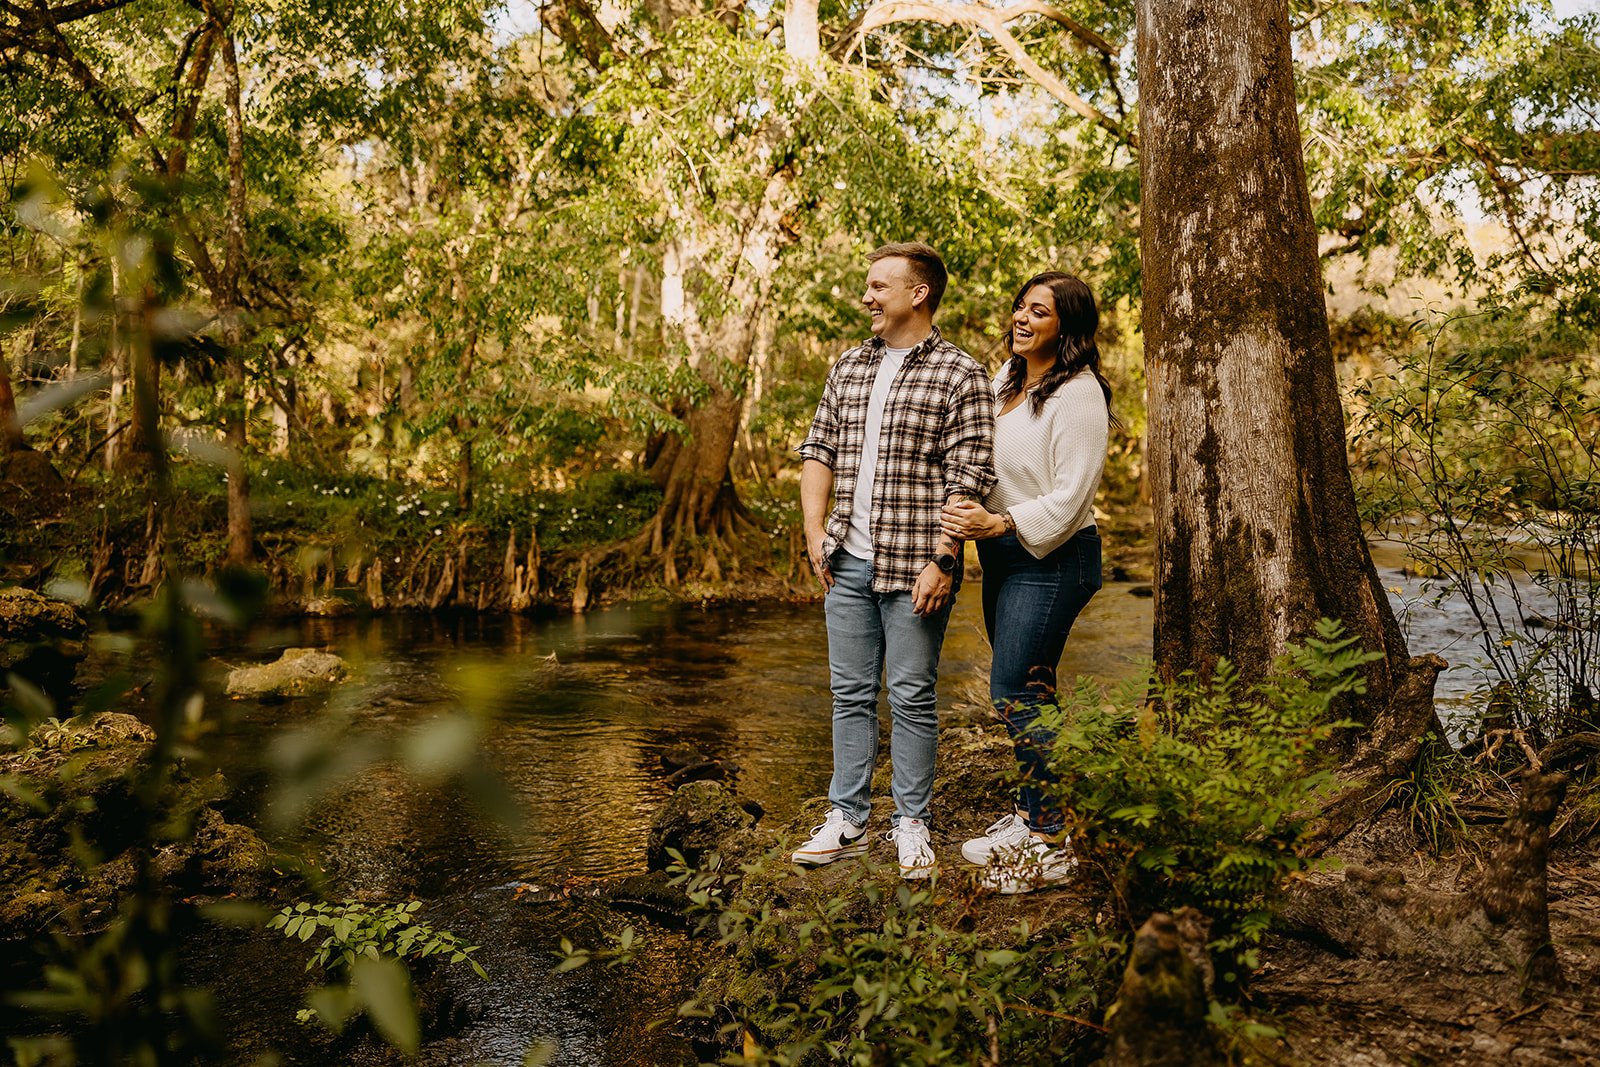 Tampa Wedding Photographer Rad Red Creative Engagement Session